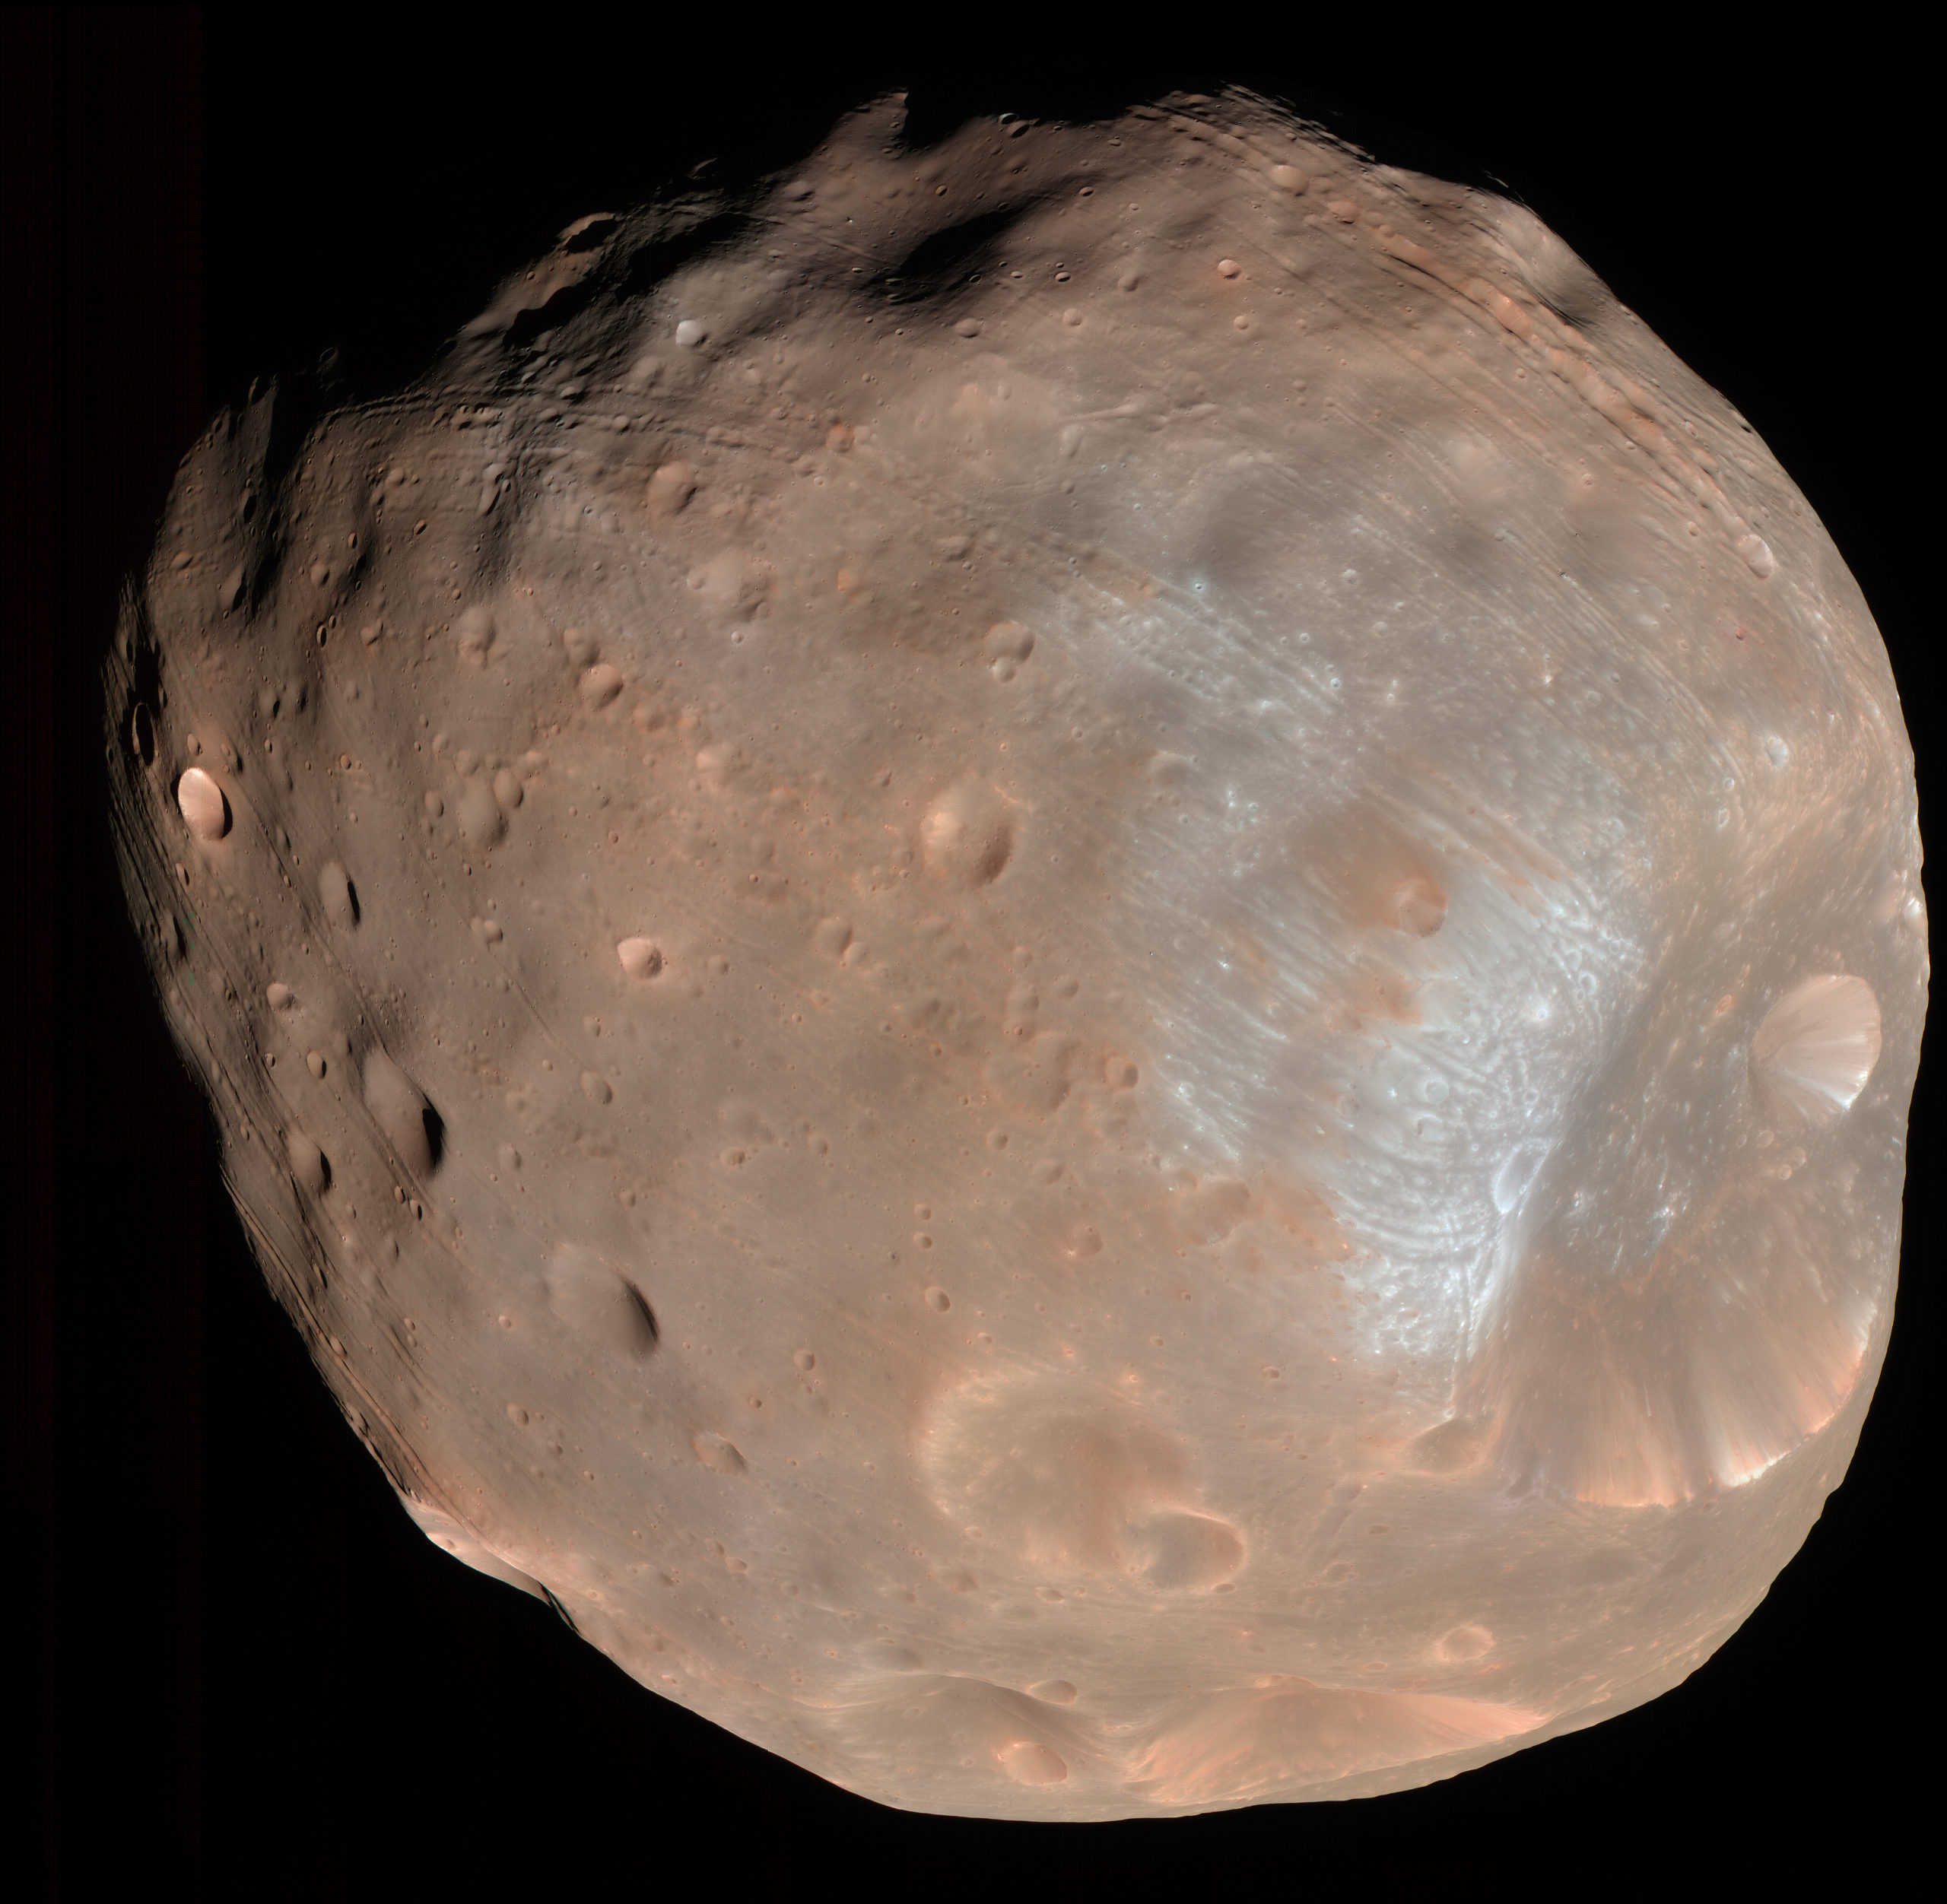 NASA Spacecraft Avoids Very Embarrassing Collision With Mars’ Moon